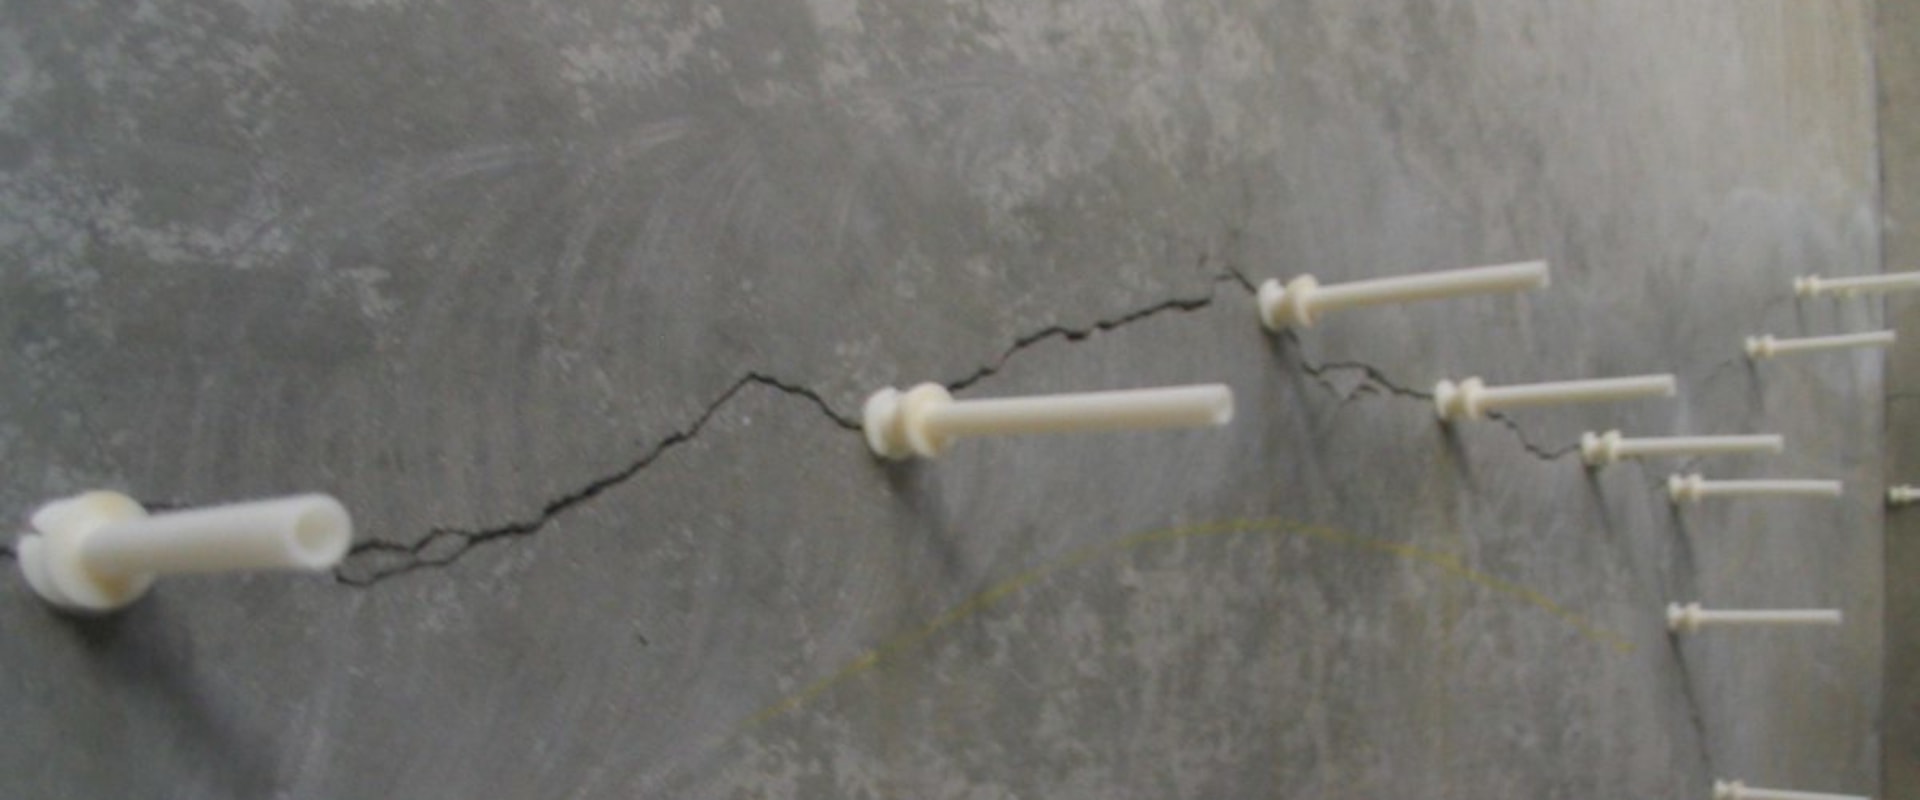 How much should I inject cracks into the foundation?